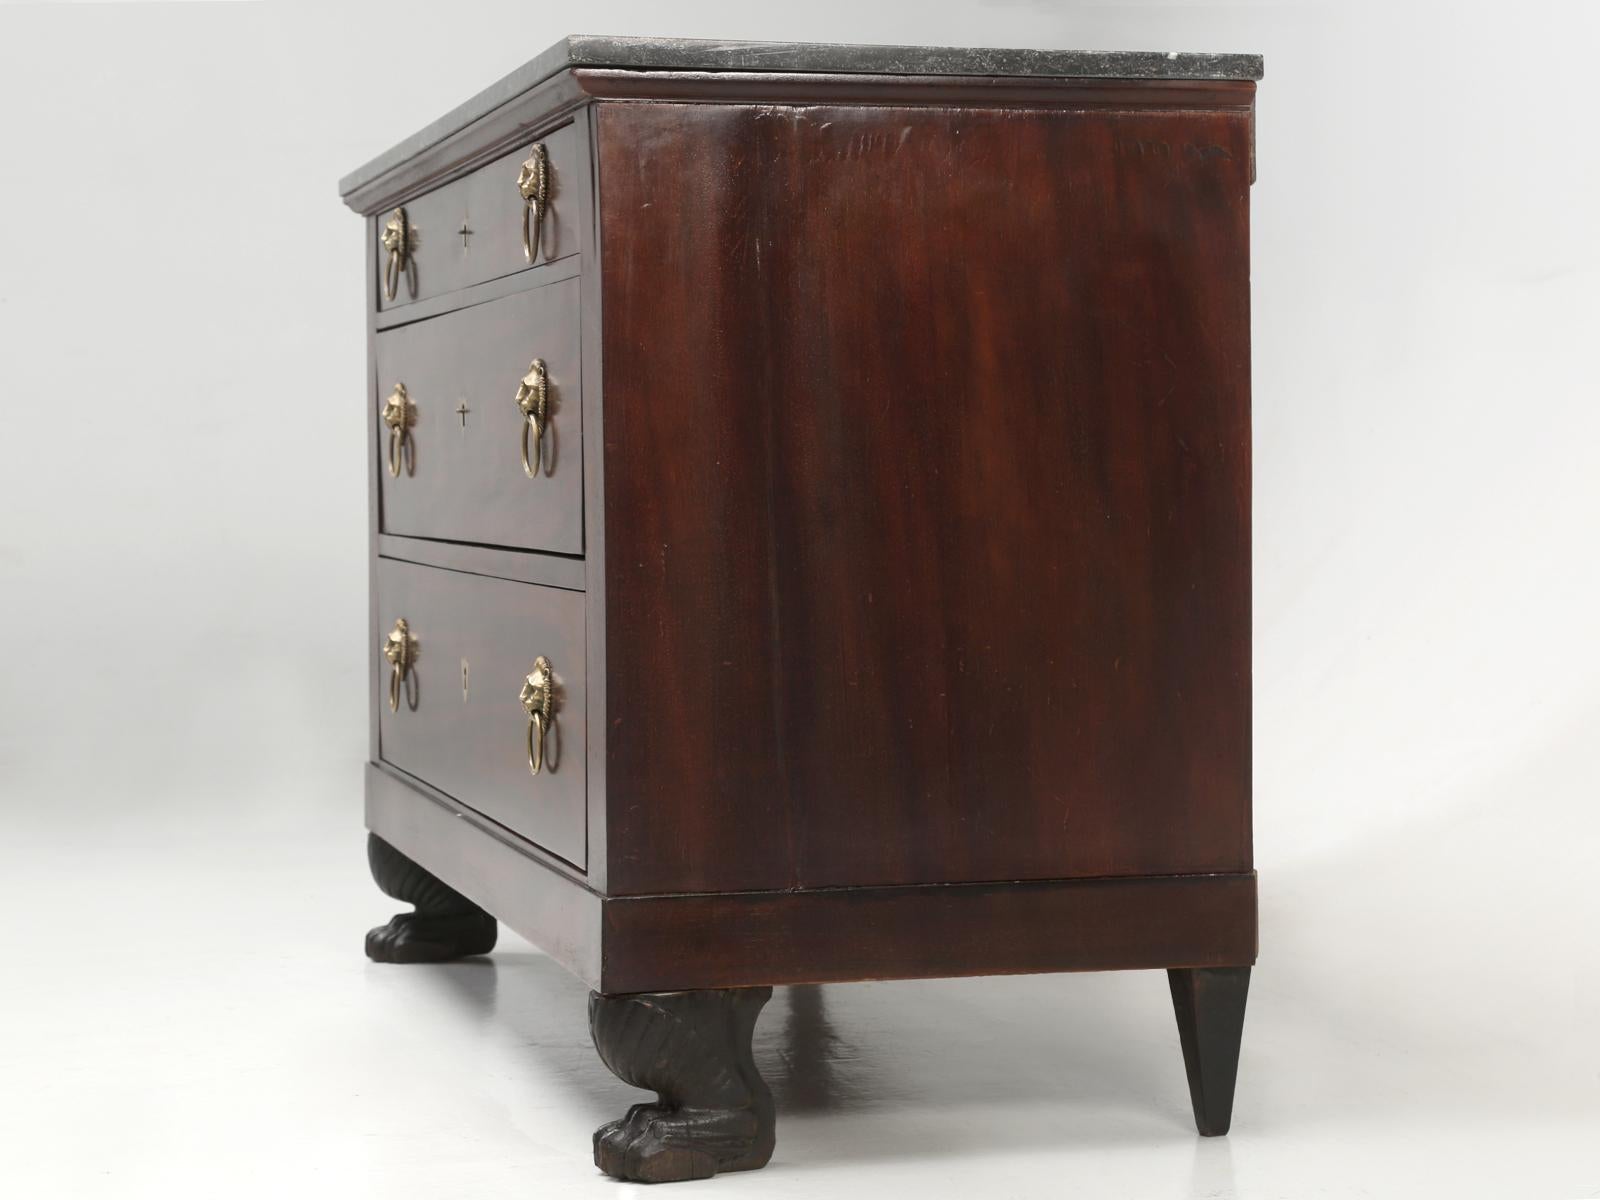 Restored antique French Empire (1804-1815), or Restoration (1815-1830) commode. Made from mahogany veneer resting on lion claw feet. Each of the antique French commode drawers, were carefully reconstructed, so they now function as originally